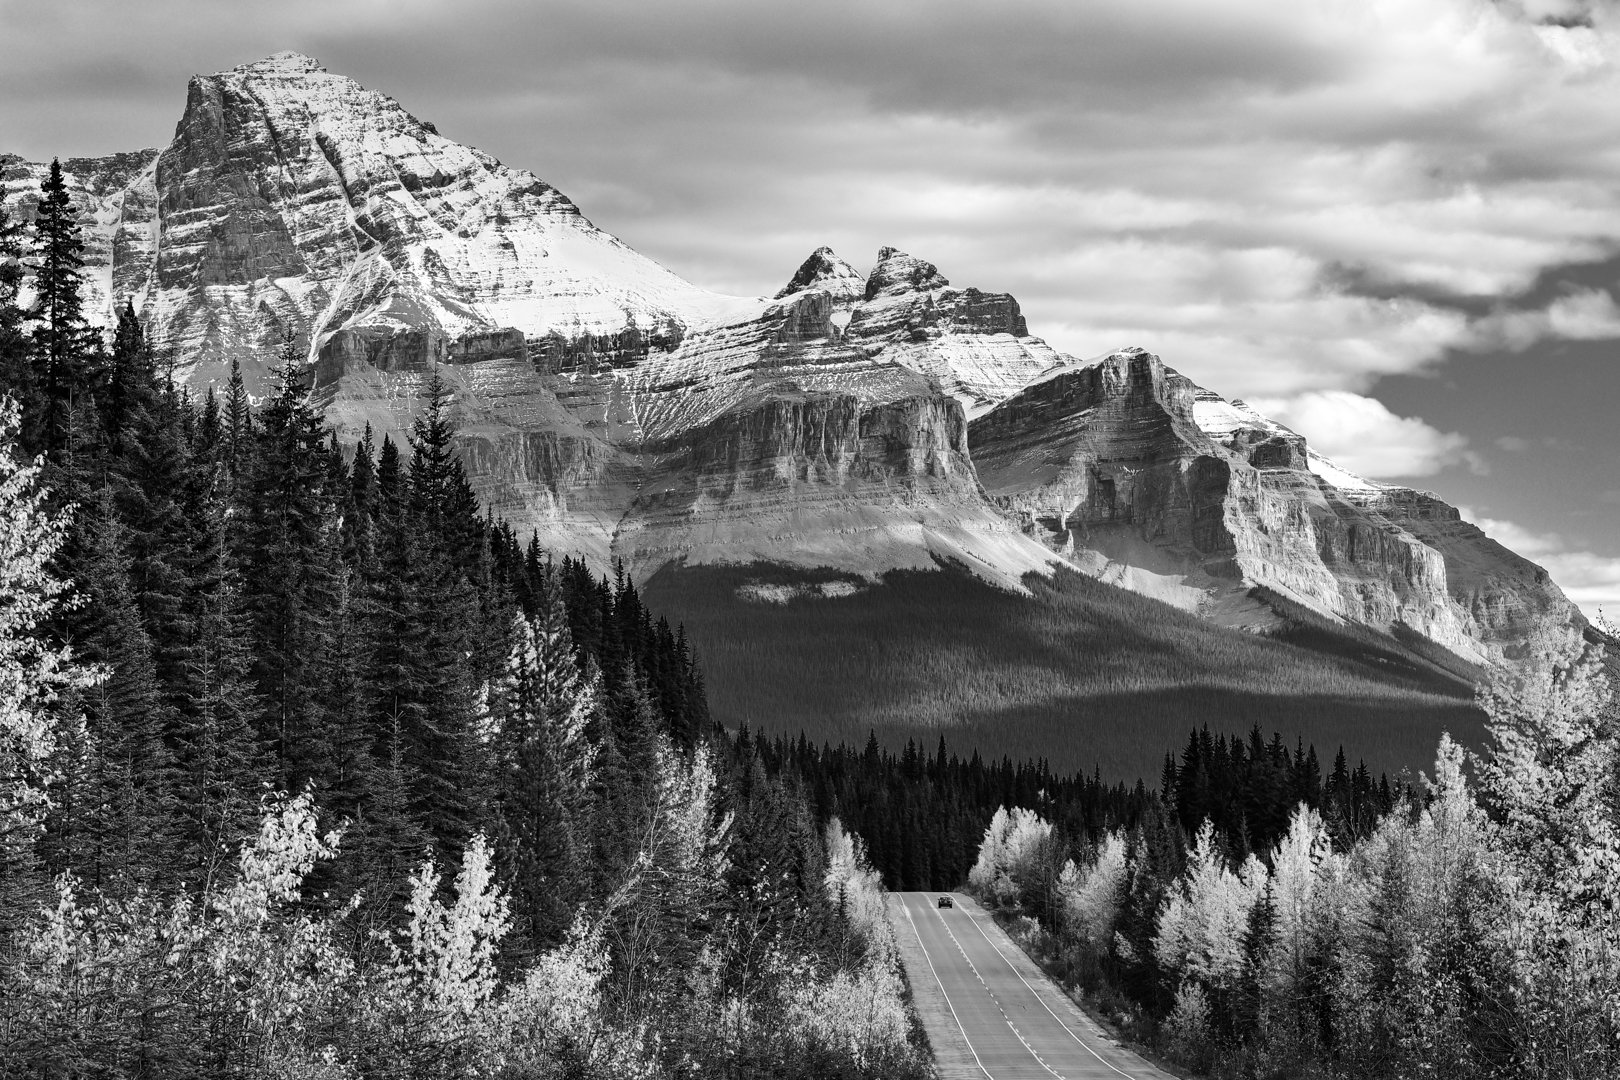 Nick Lefebvre - On the road again  MOUNTAIN LANDSCAPE IMAGE OF THE YEAR